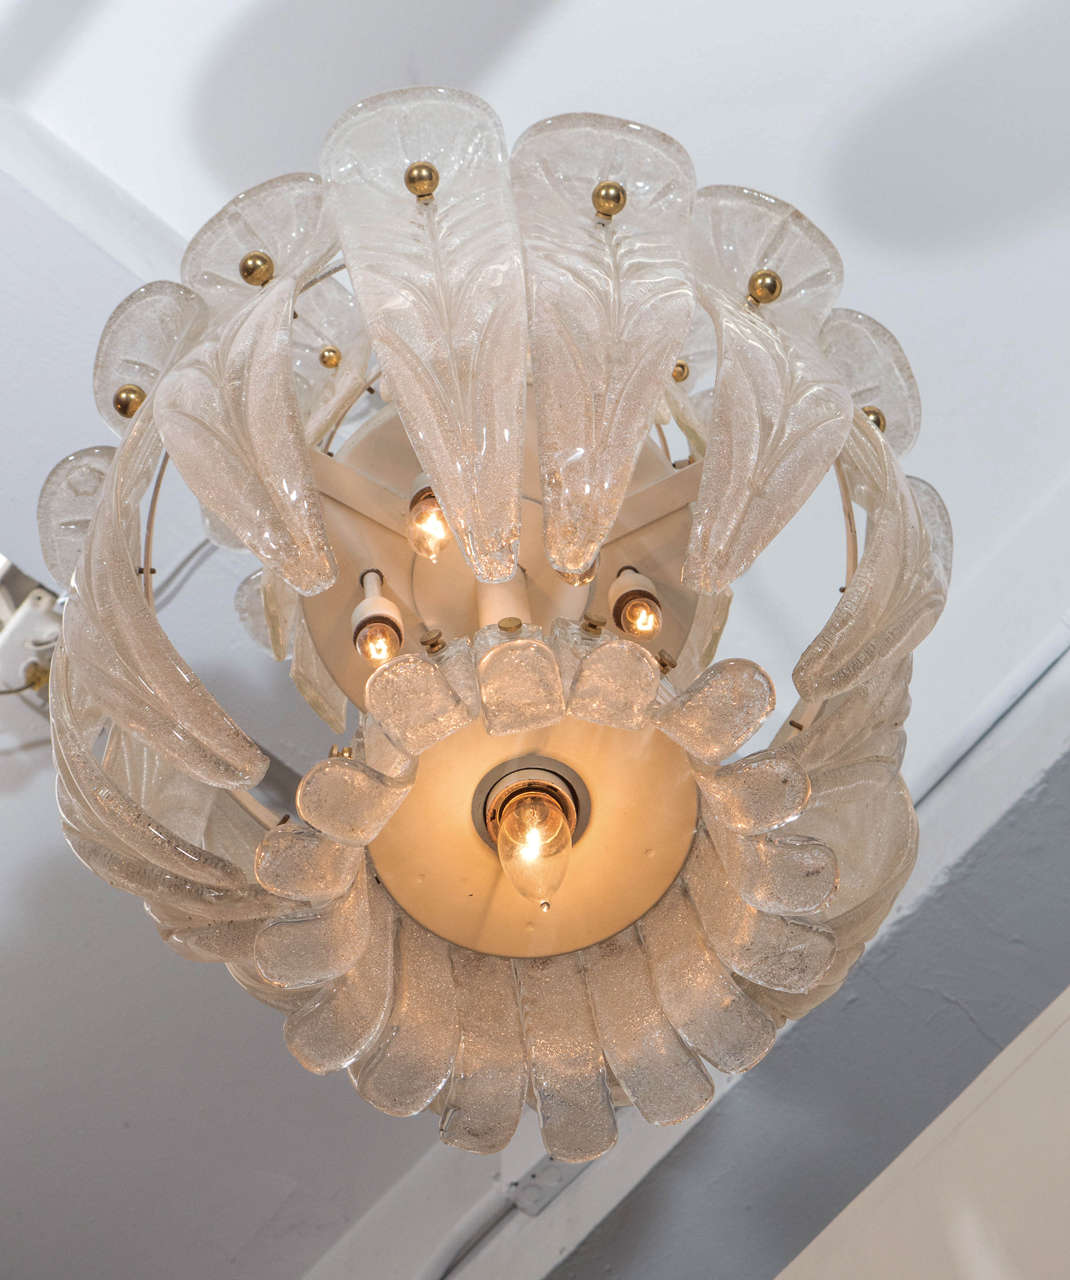 20th Century Midcentury Barovier & Toso Glass Floral Chandelier